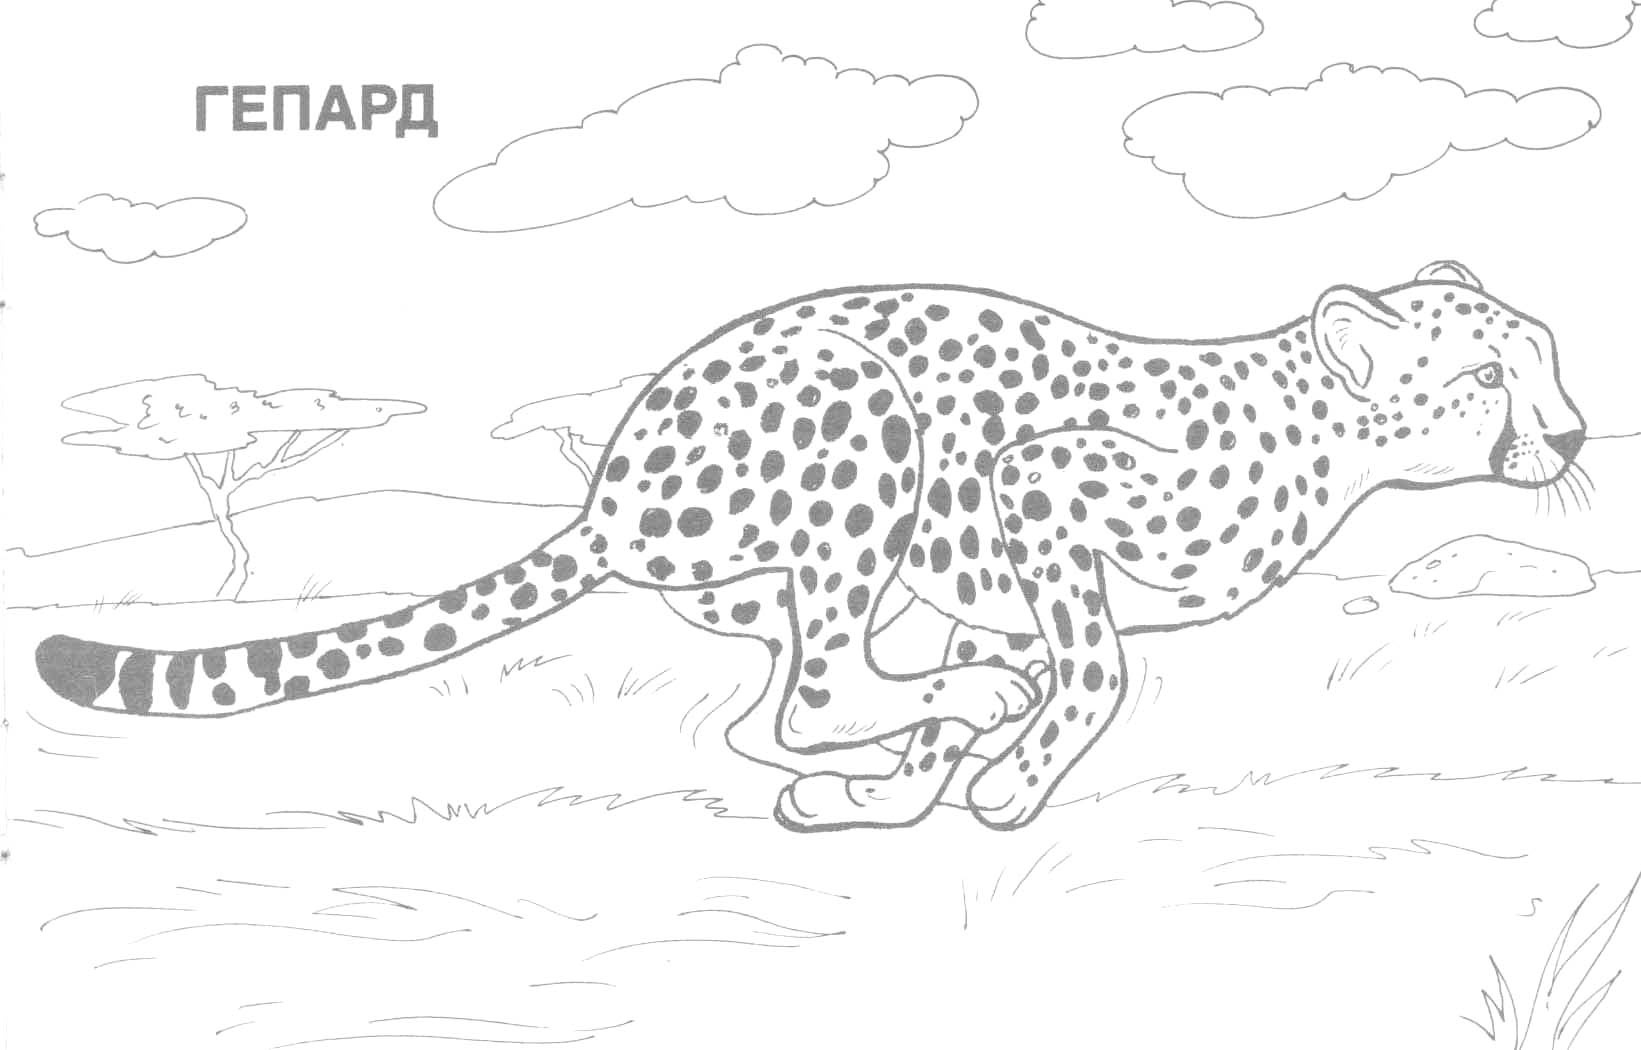 Coloring Ideas : Wild Animal Coloring Sheets Image Inspirations - Free Printable Wild Animal Coloring Pages